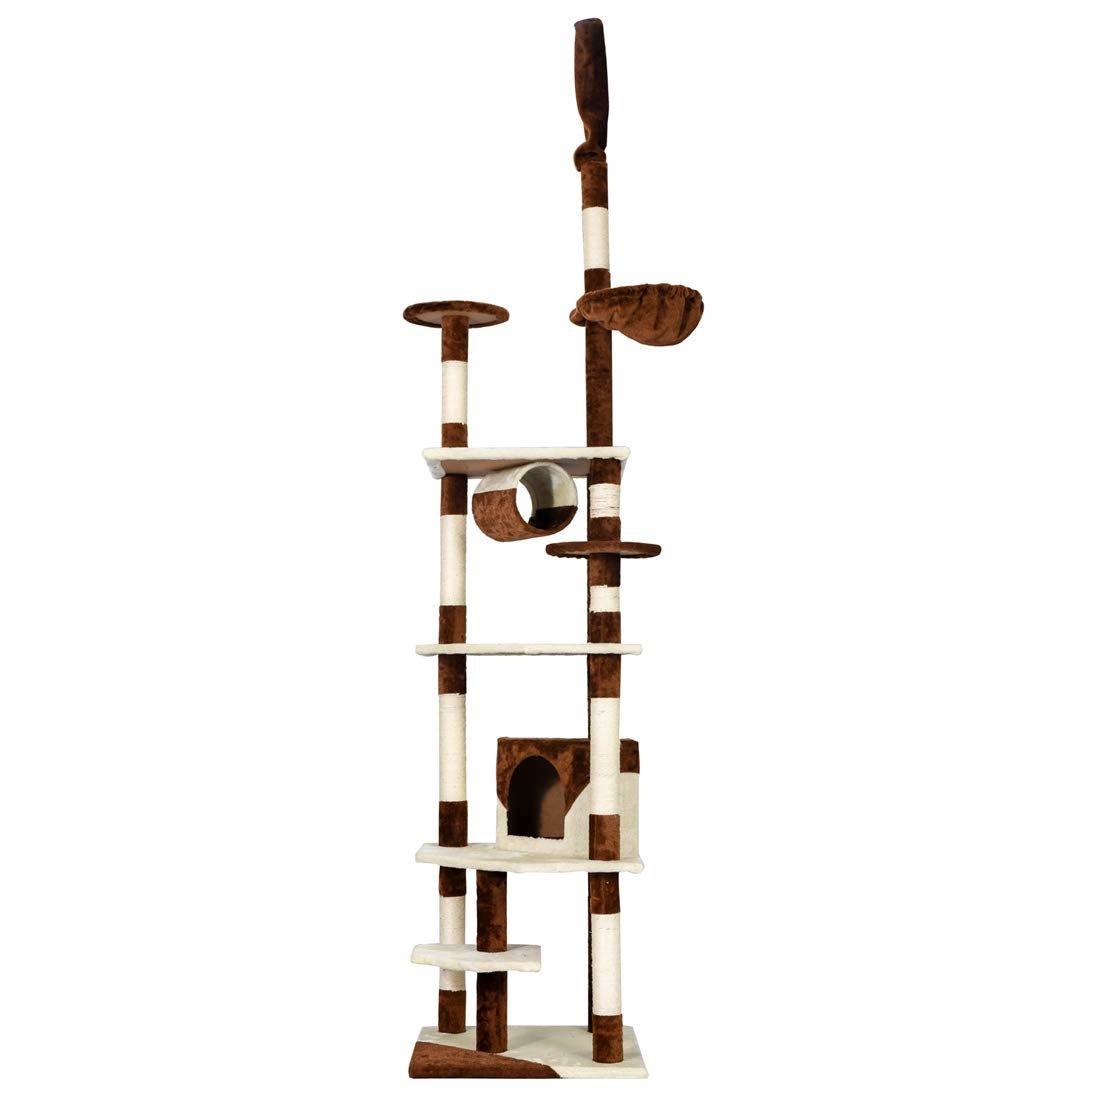 Floor To Ceiling Cat Tree - This cat tree withs mall footprint and tension pole stable enough for LARGE cats!